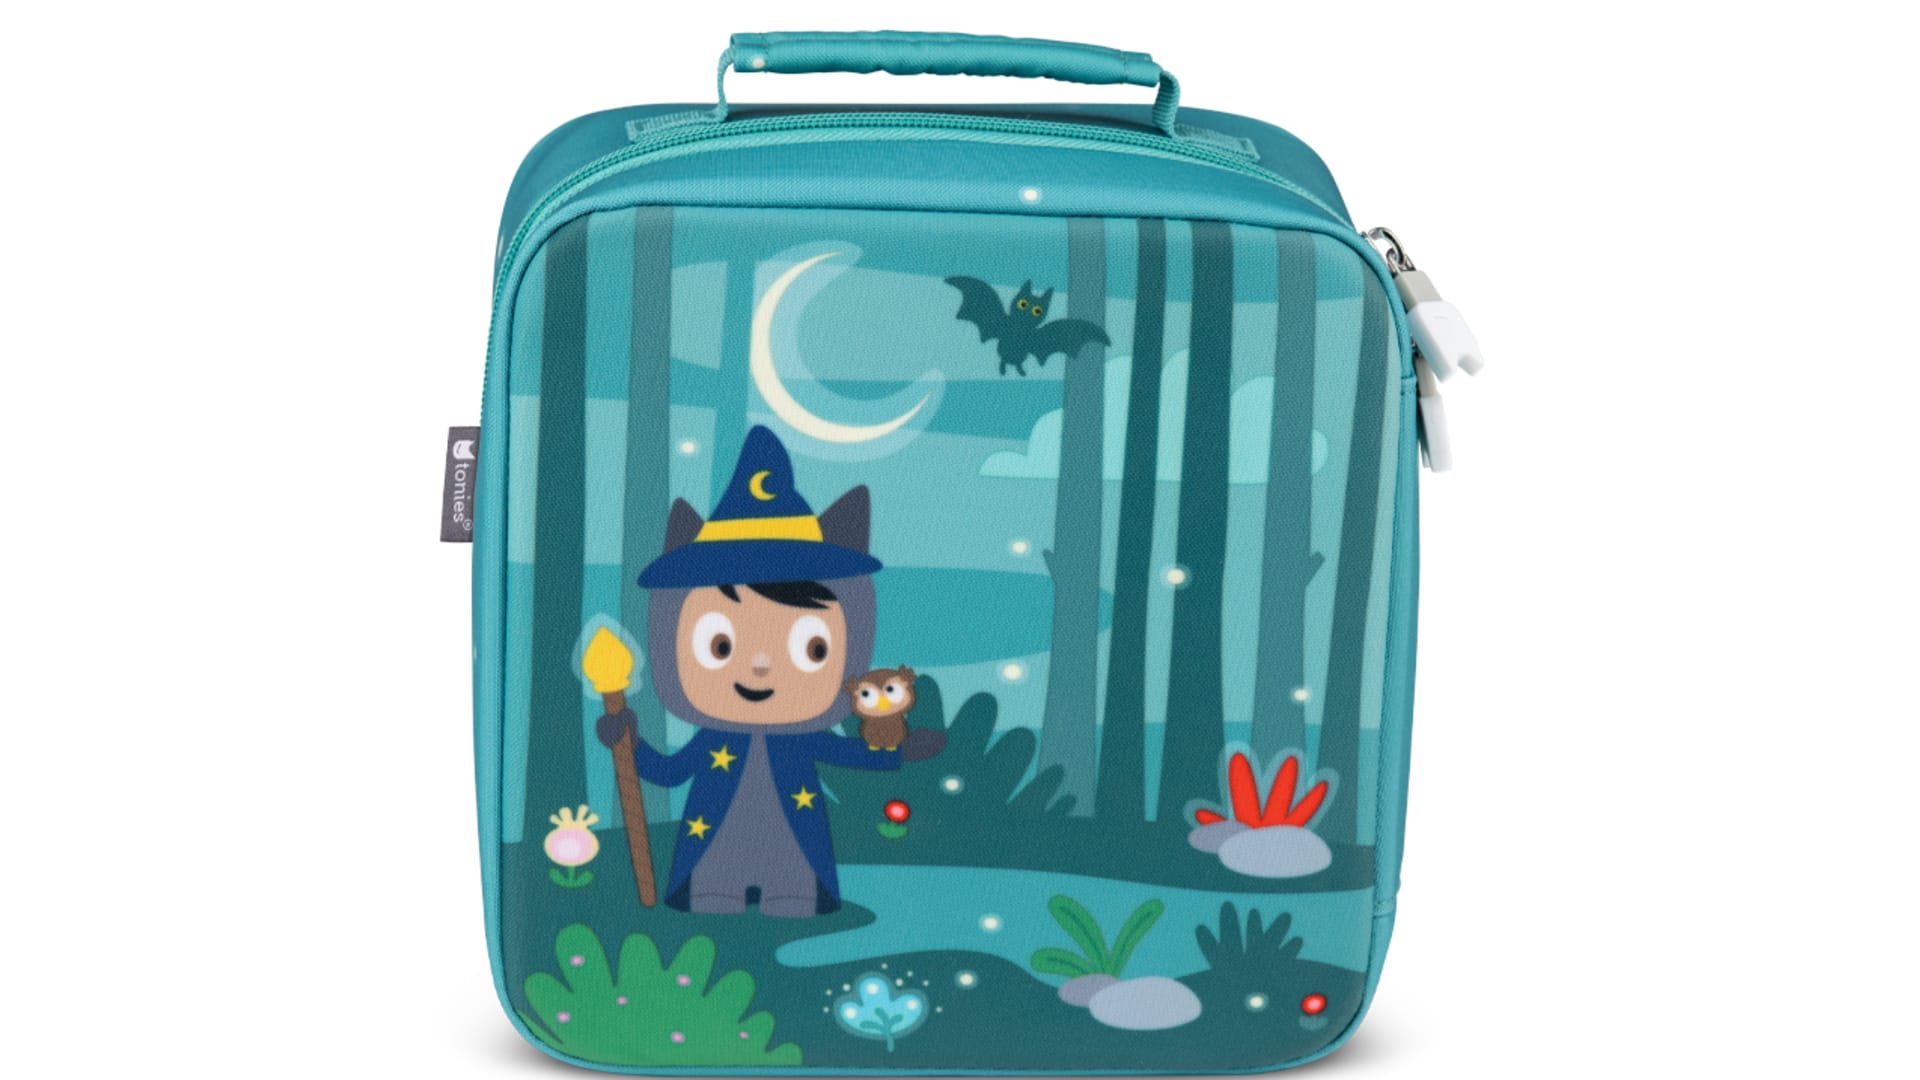 tonies® I Carry Case Max - Enchanted Forest I Buy now online